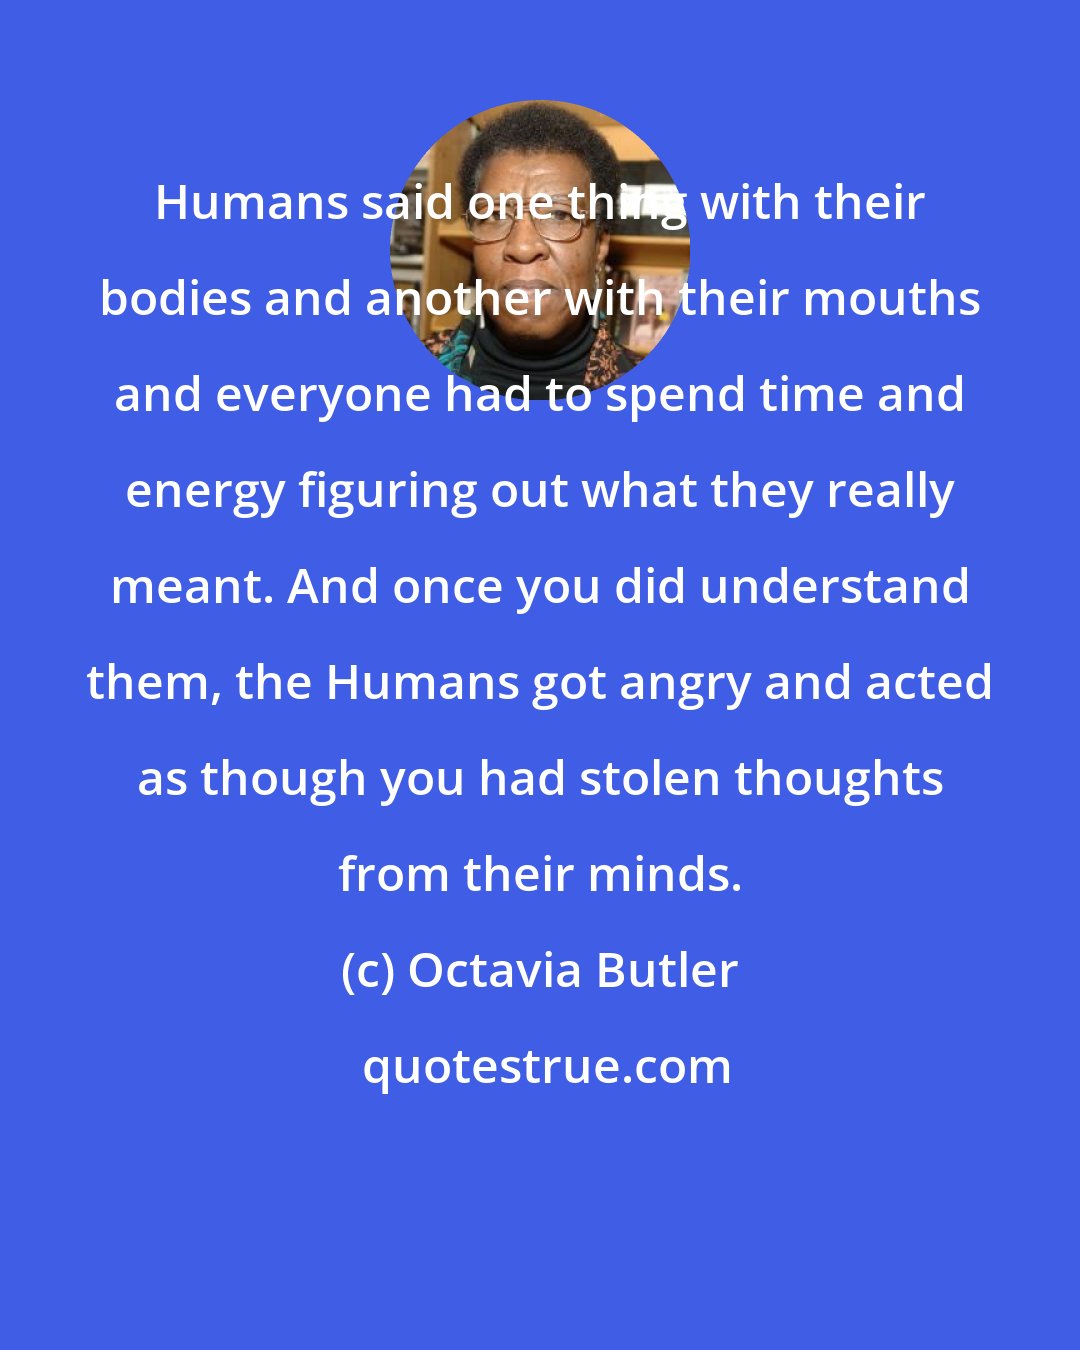 Octavia Butler: Humans said one thing with their bodies and another with their mouths and everyone had to spend time and energy figuring out what they really meant. And once you did understand them, the Humans got angry and acted as though you had stolen thoughts from their minds.